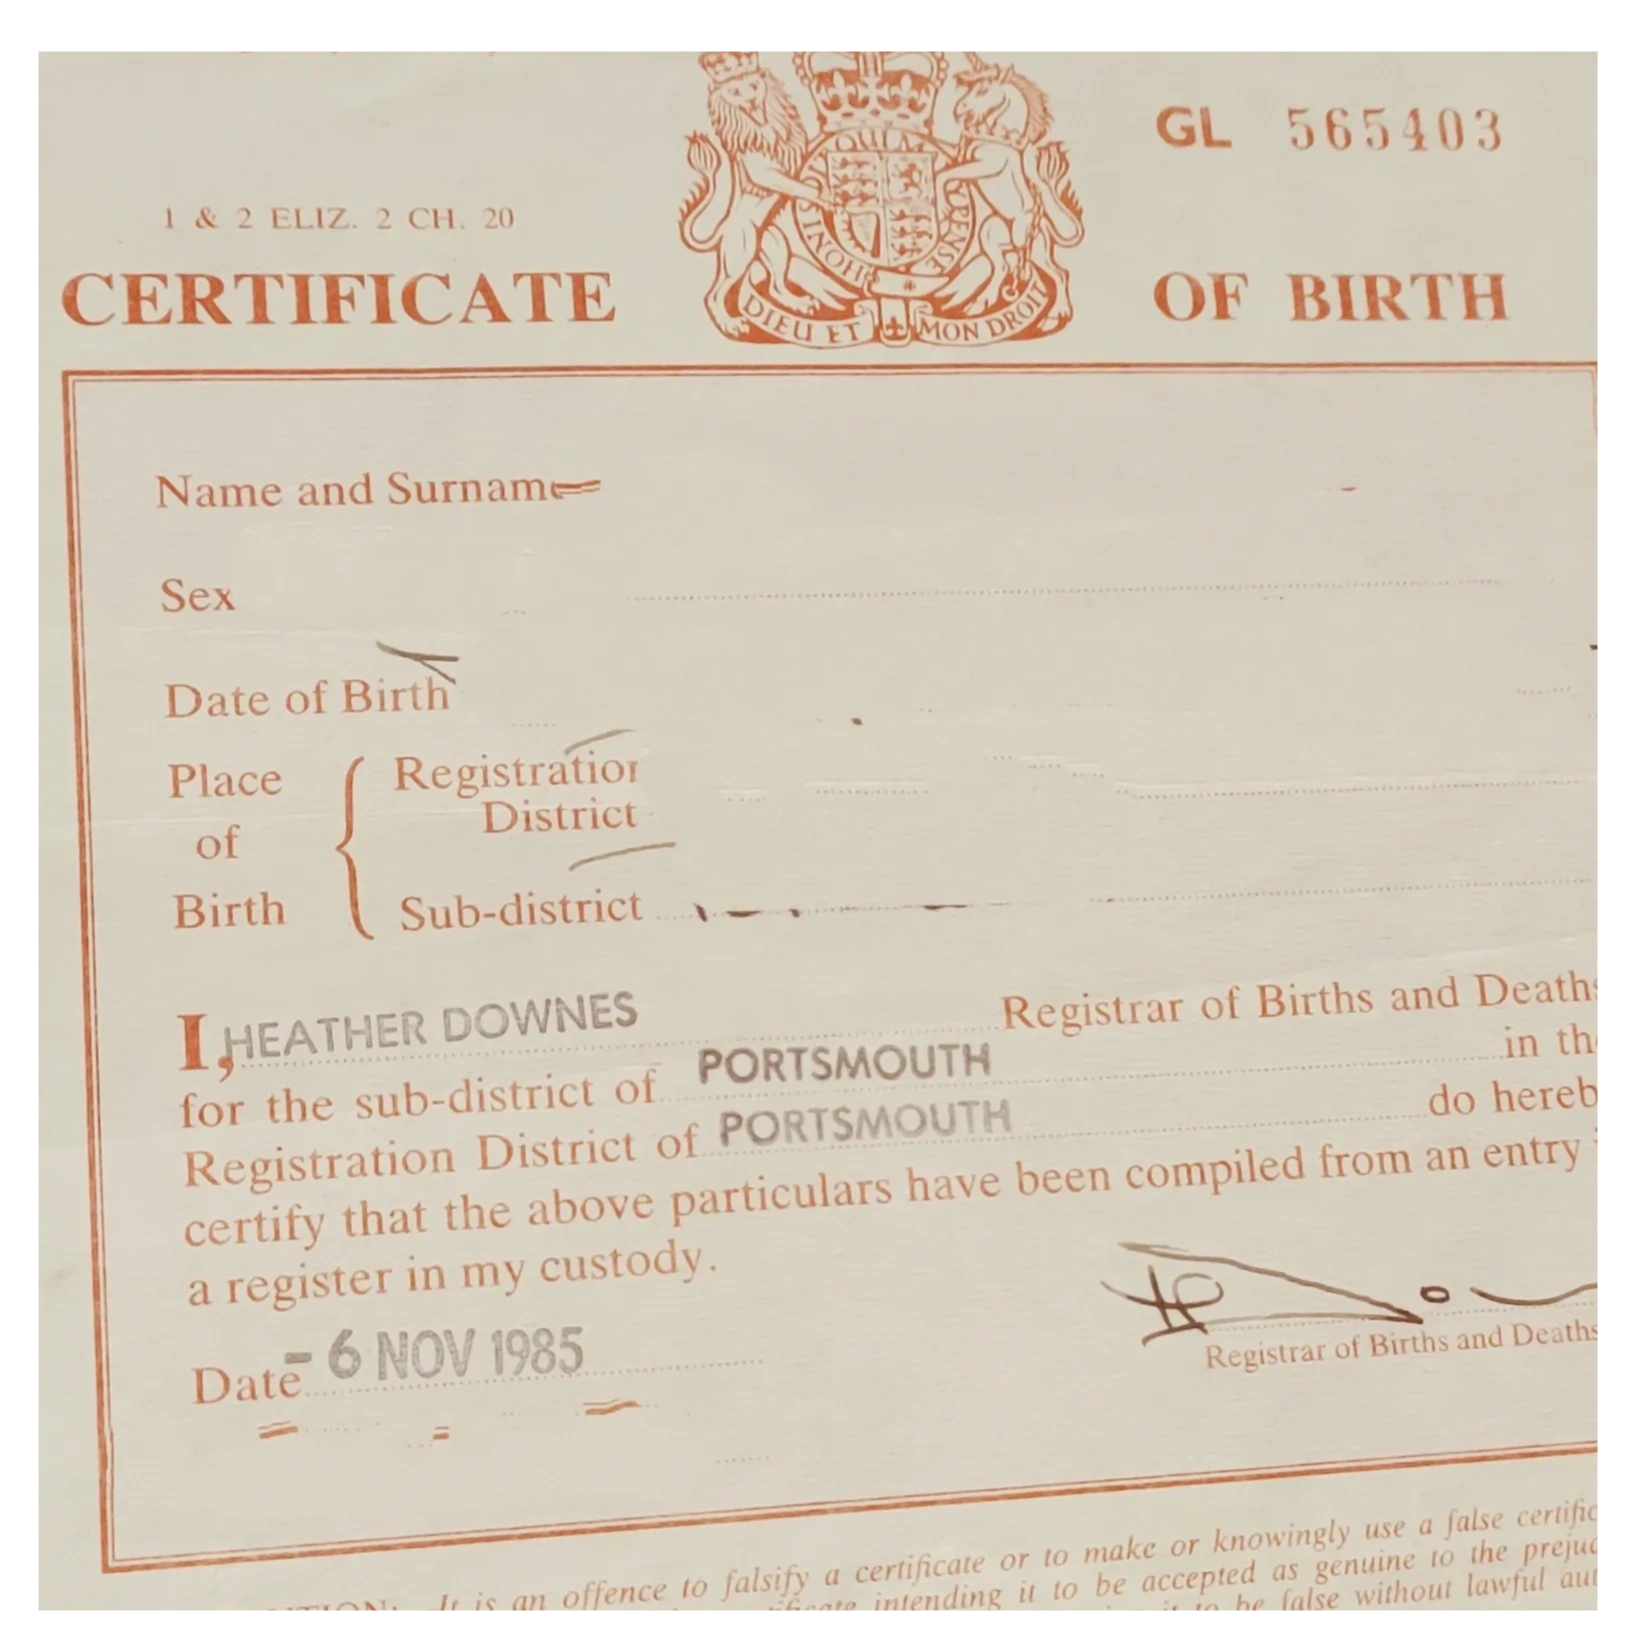 How To Get A Certified Translation Of A Birth Certificate